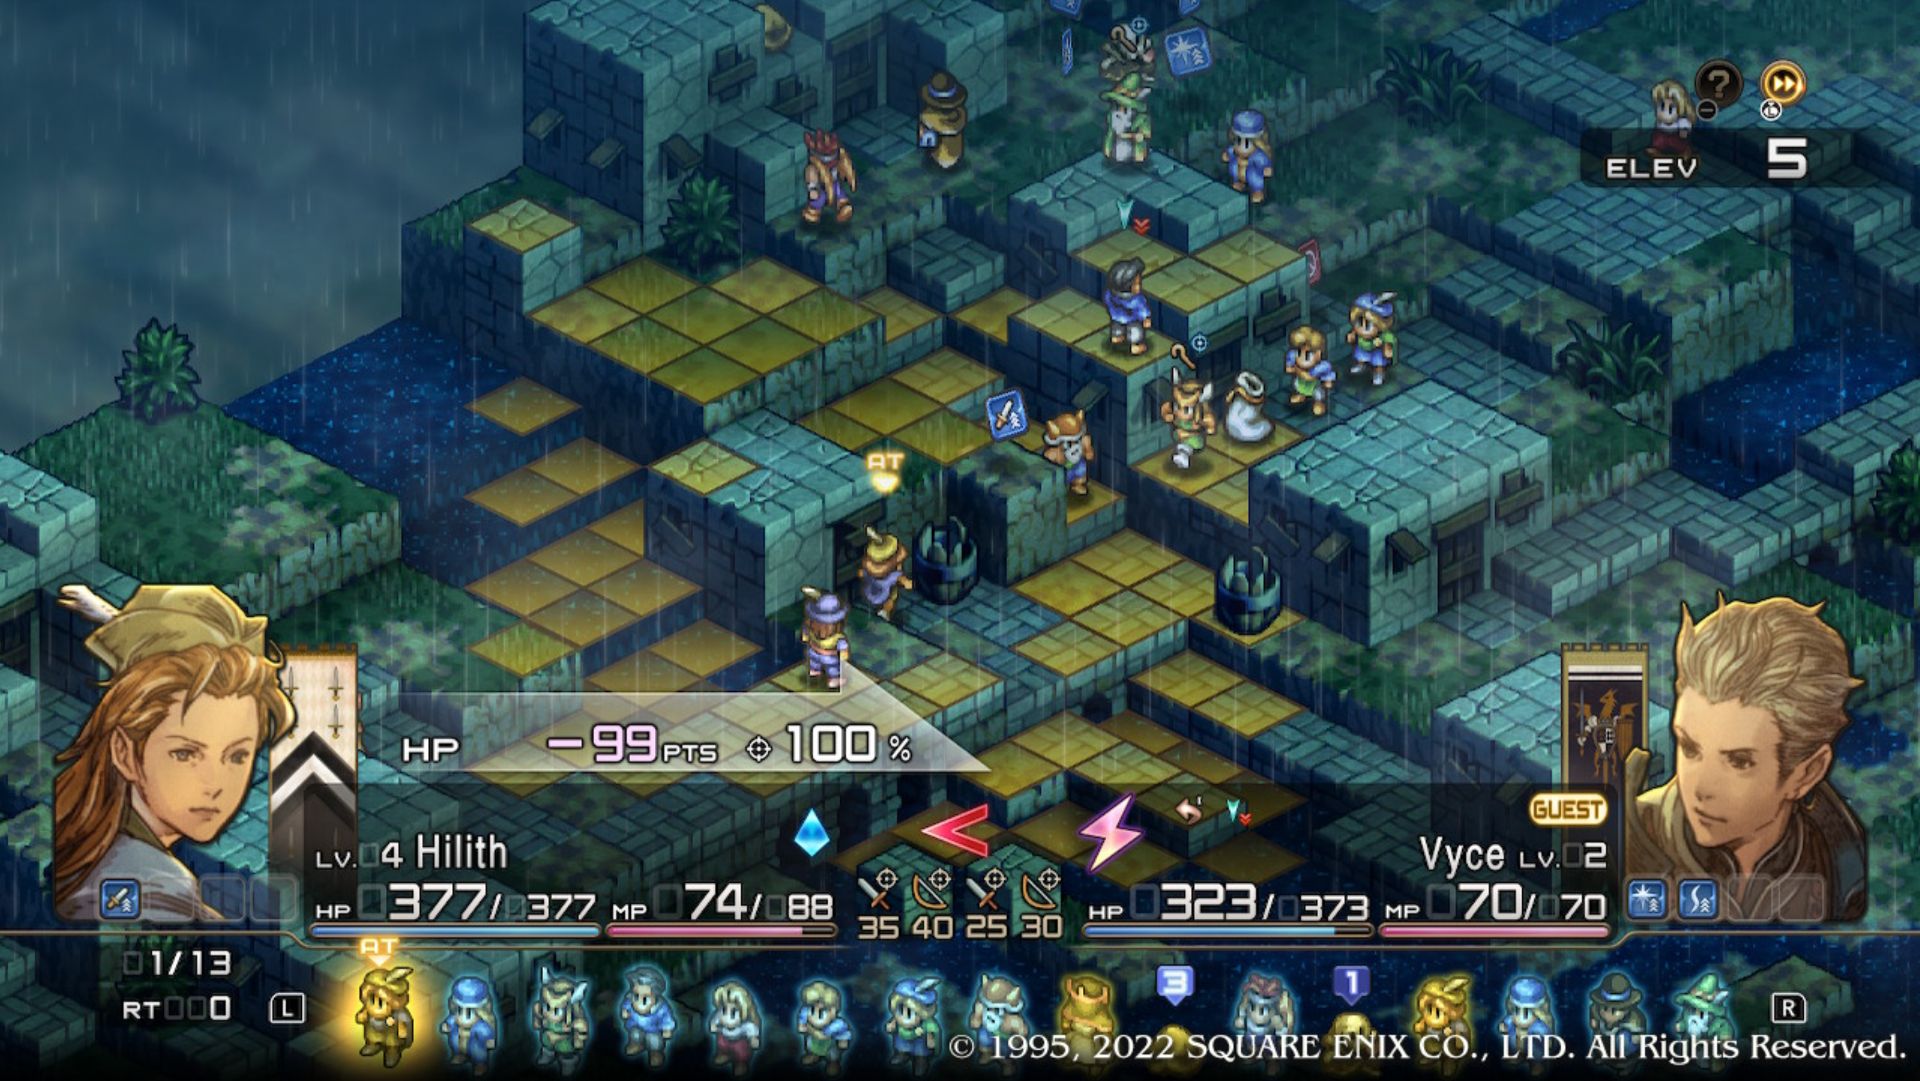 An archer targets Vyce in Tactics Ogre: Reborn